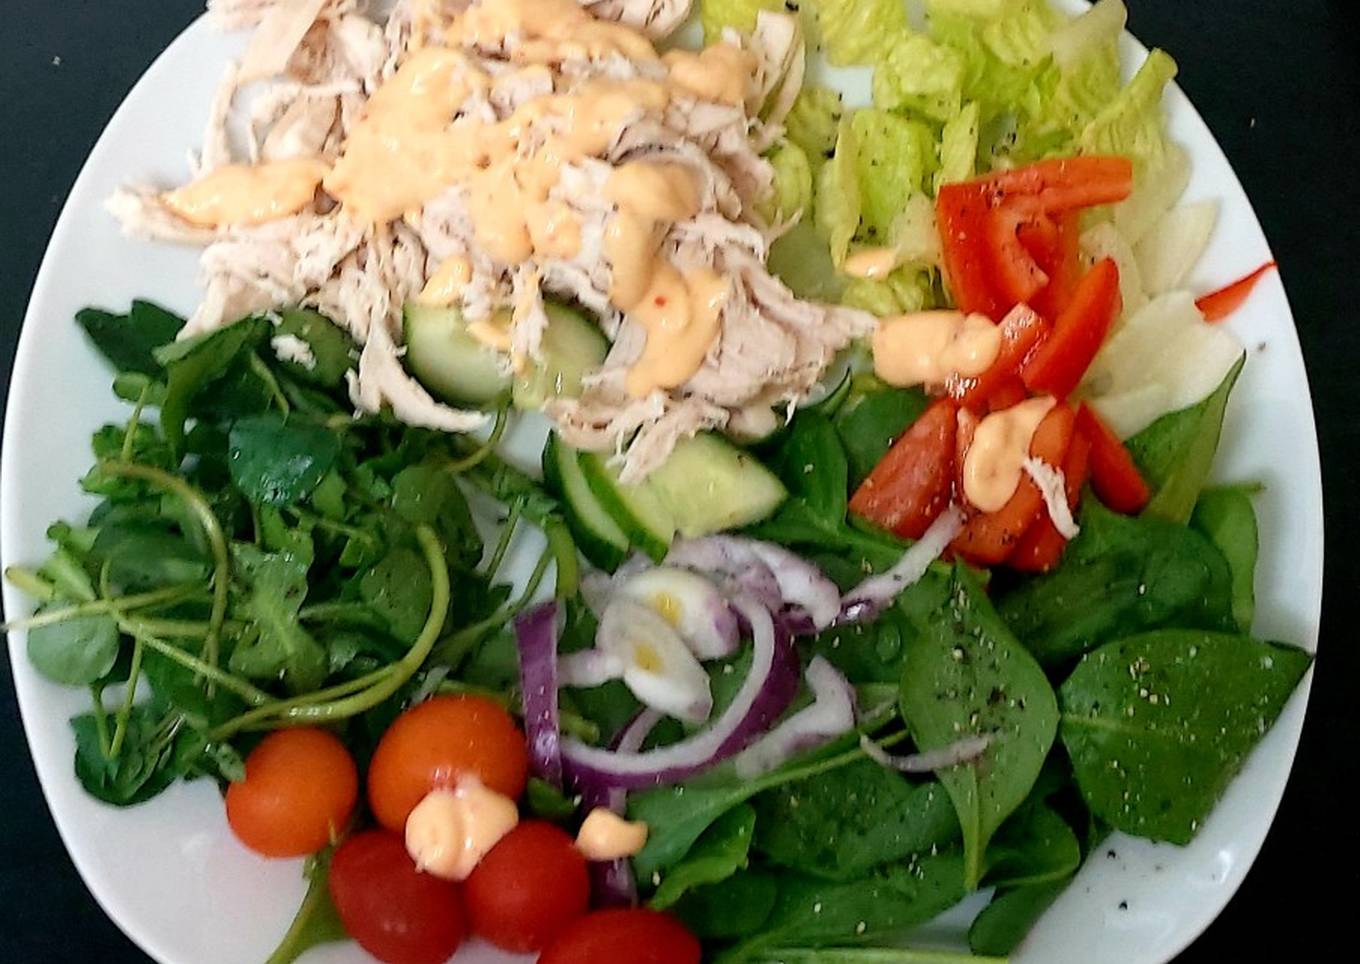 My favourite,Steamed Pulled Chicken Salad with a Spicy Mayonnaise